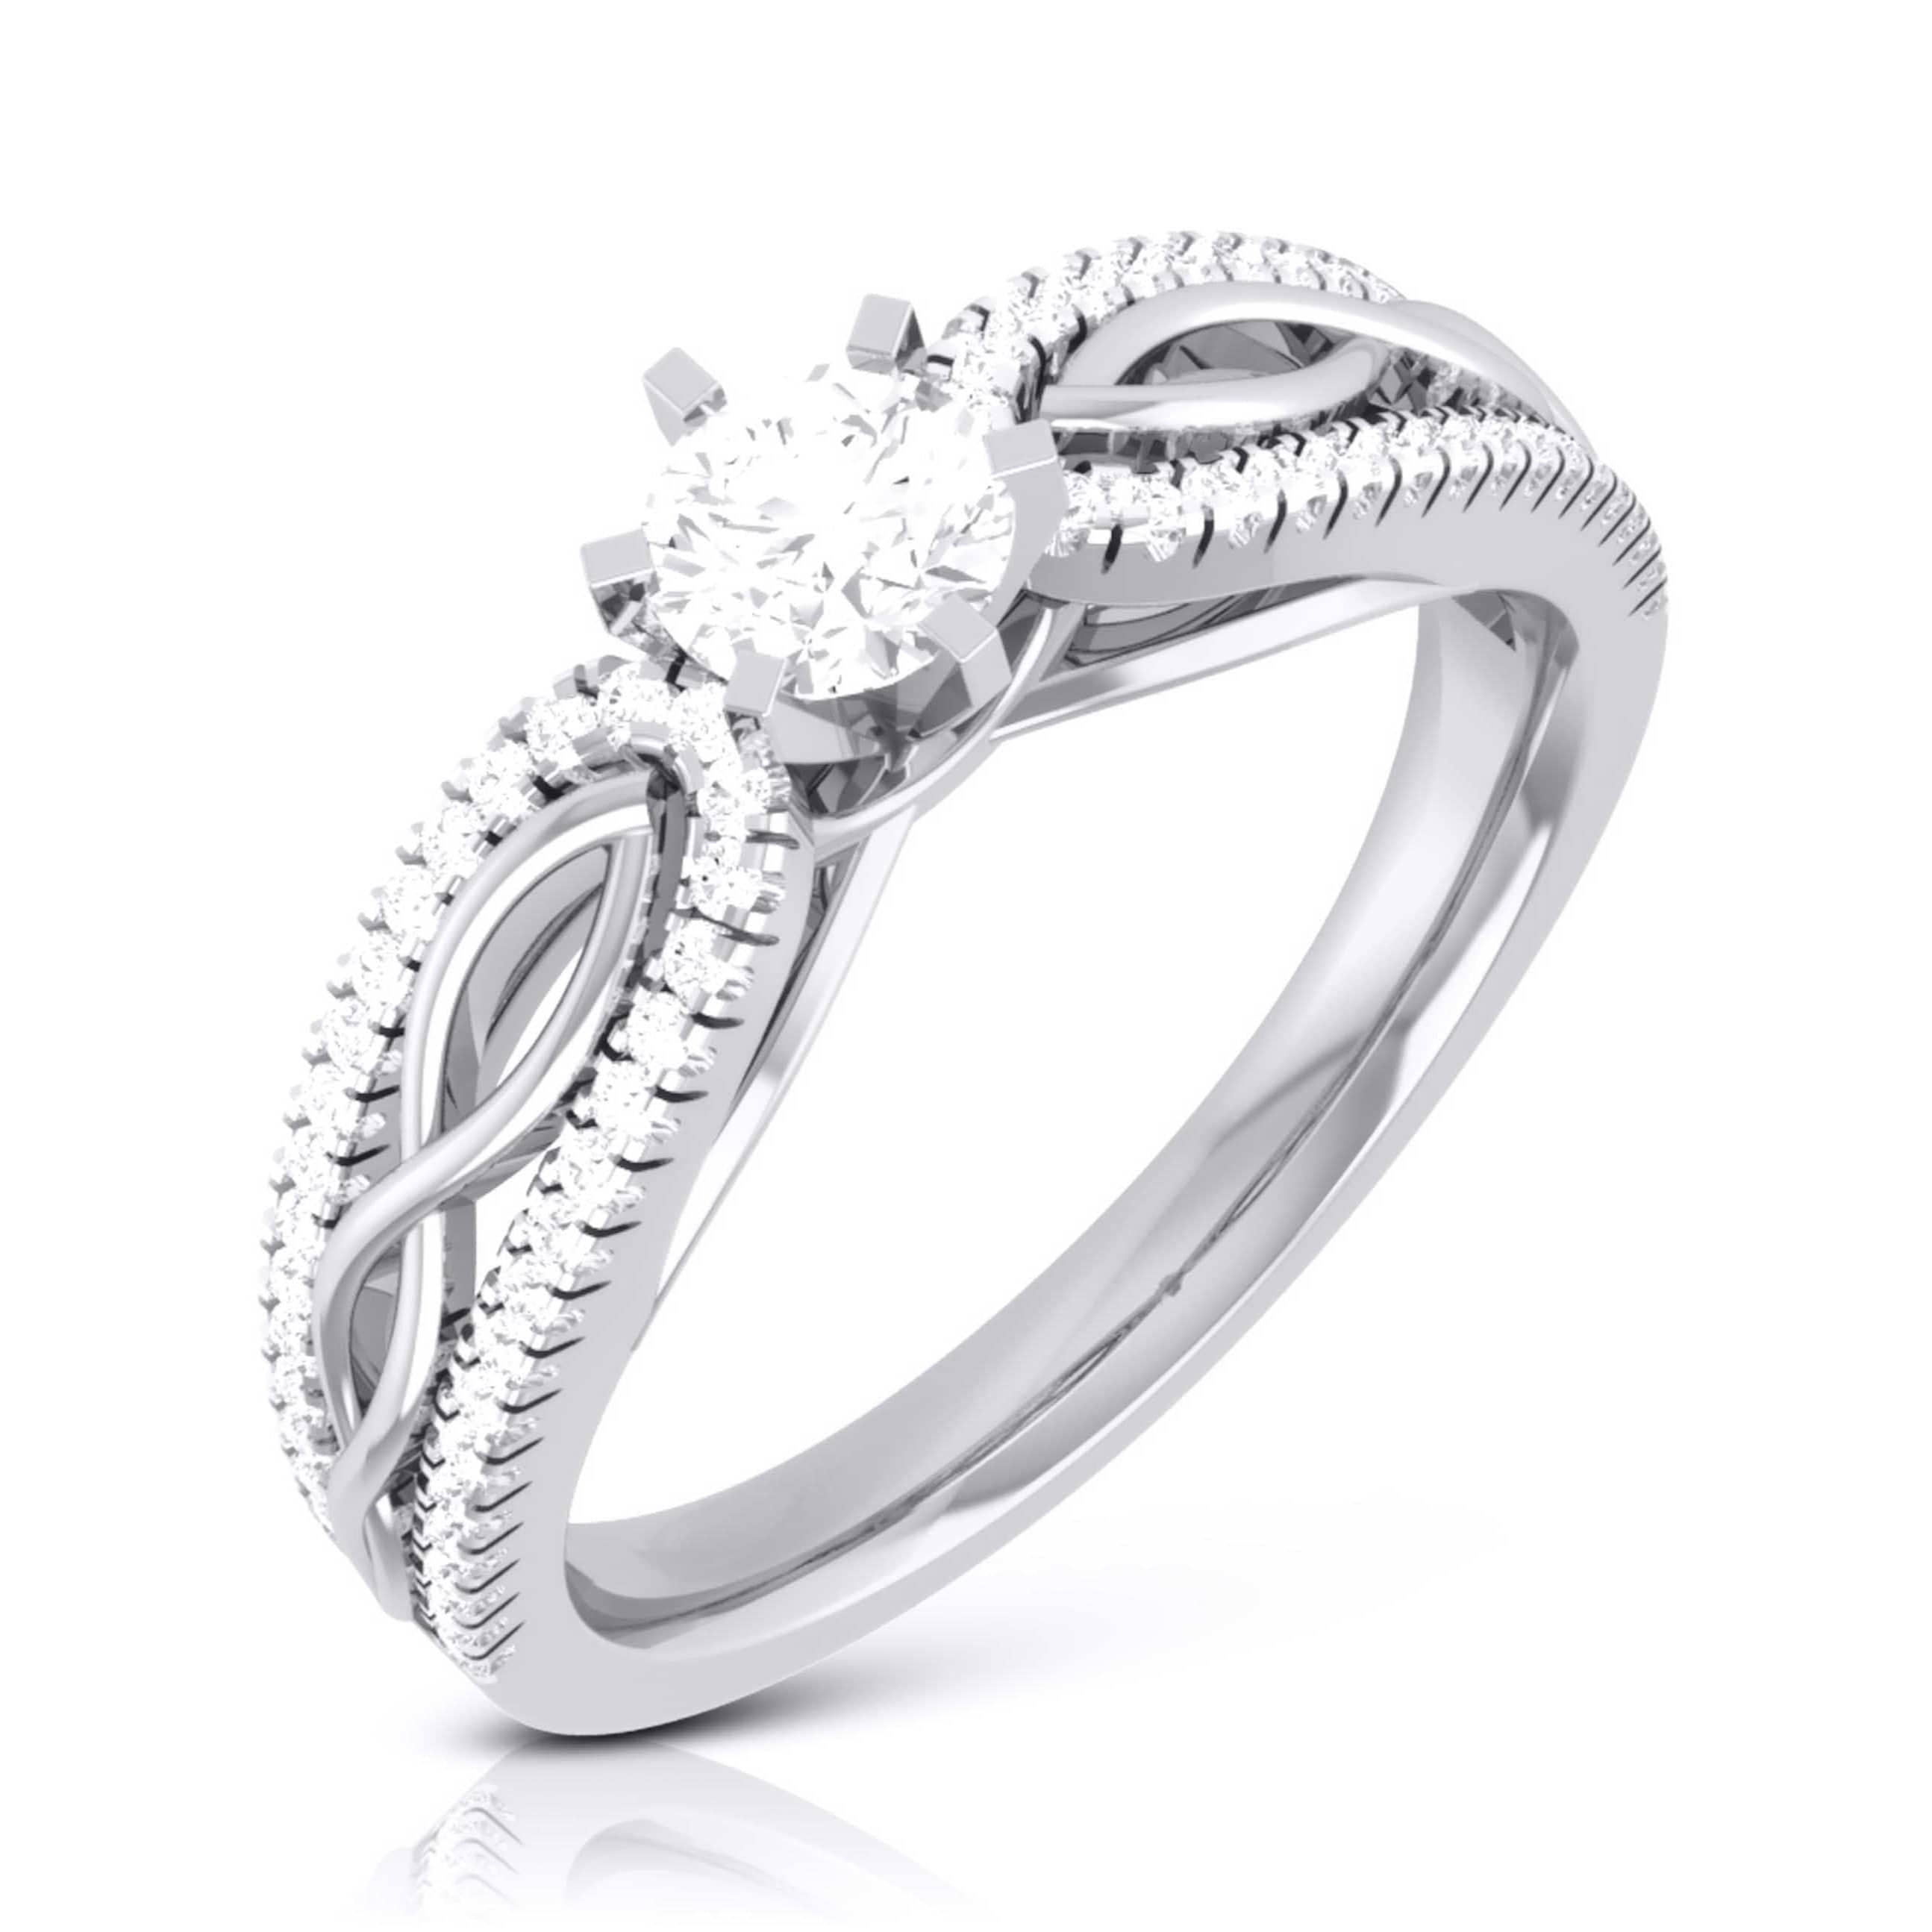 A silver diamond ring for engagement | My Diamond Ring